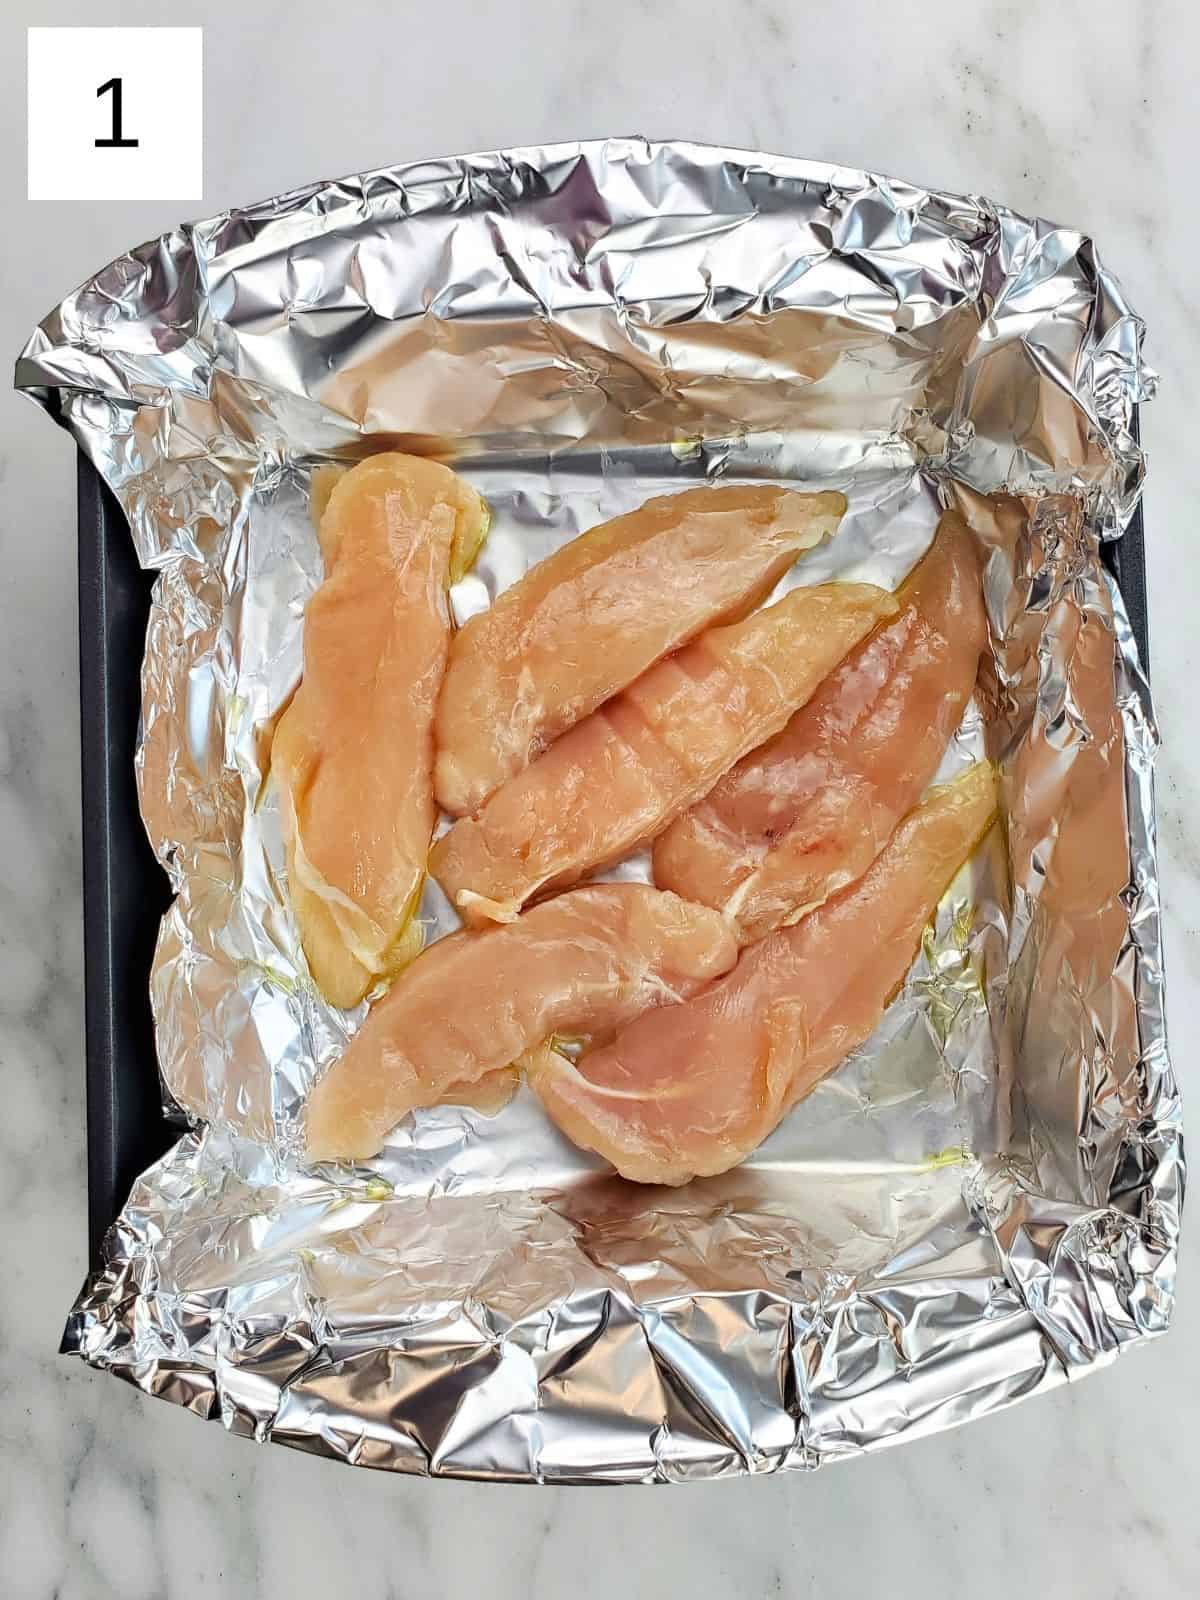 chicken tenders arranged on a foil-lined baking tray.